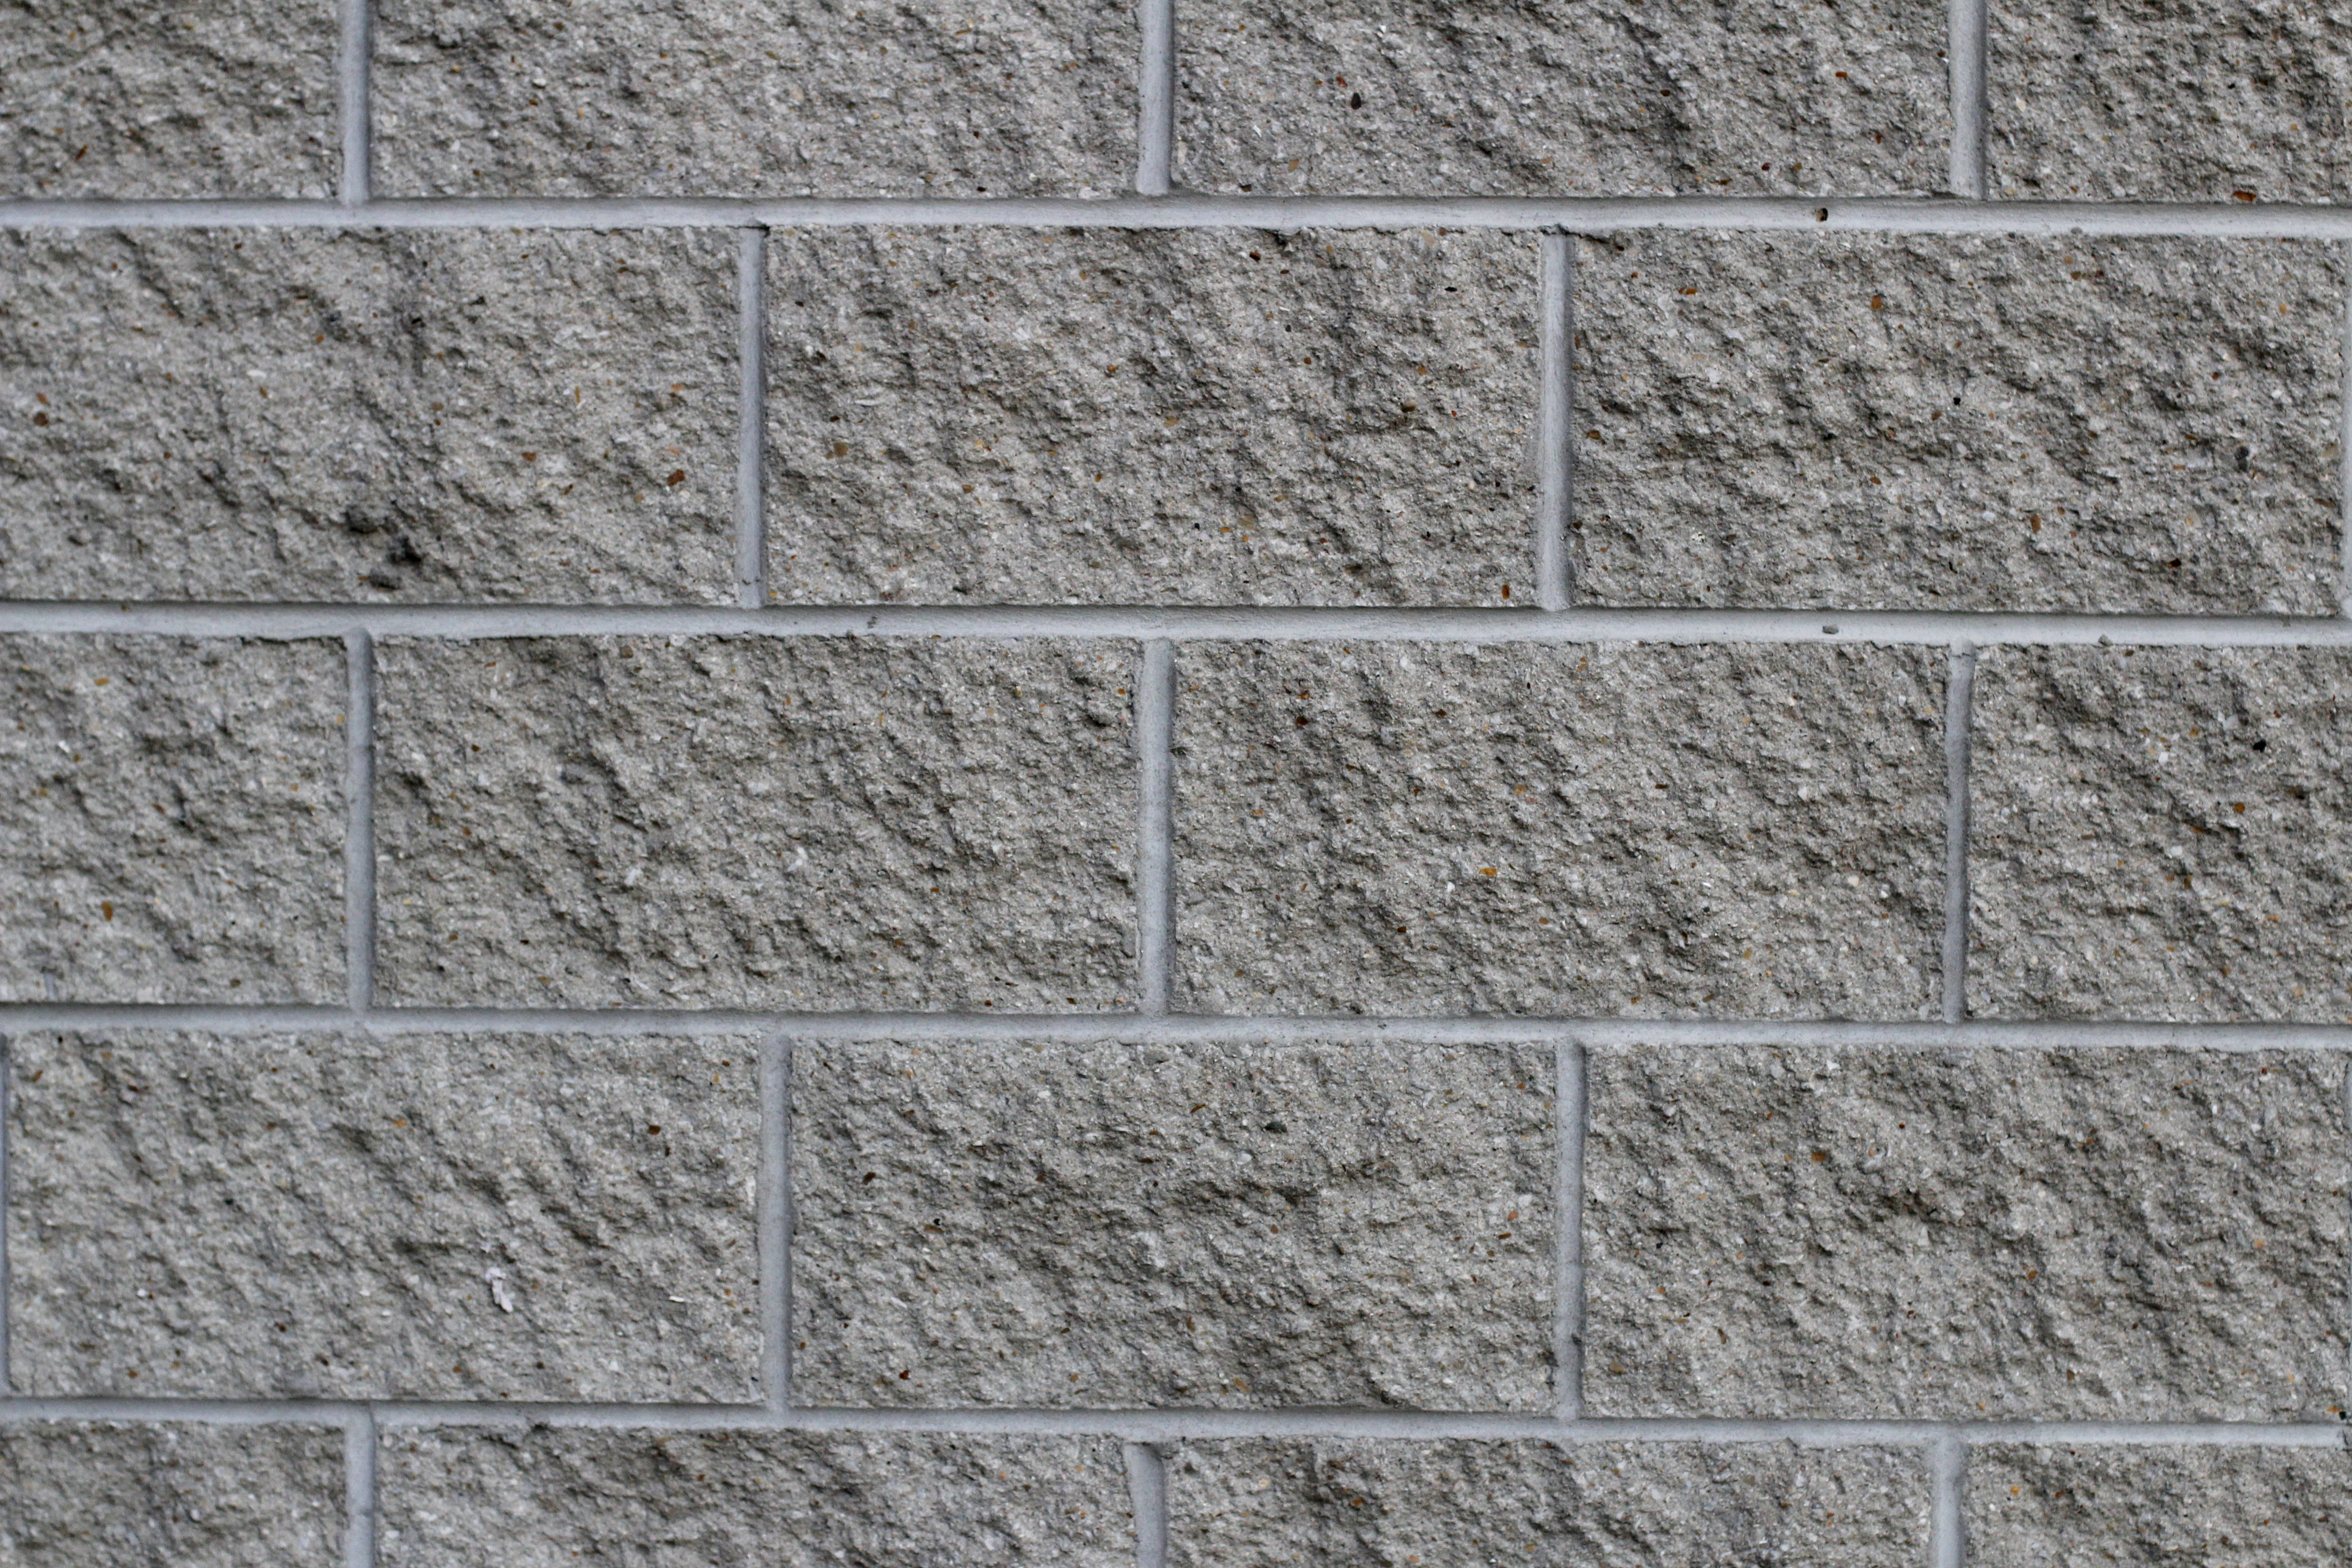 Wall Texture 6 by ScooterboyEx221 on DeviantArt